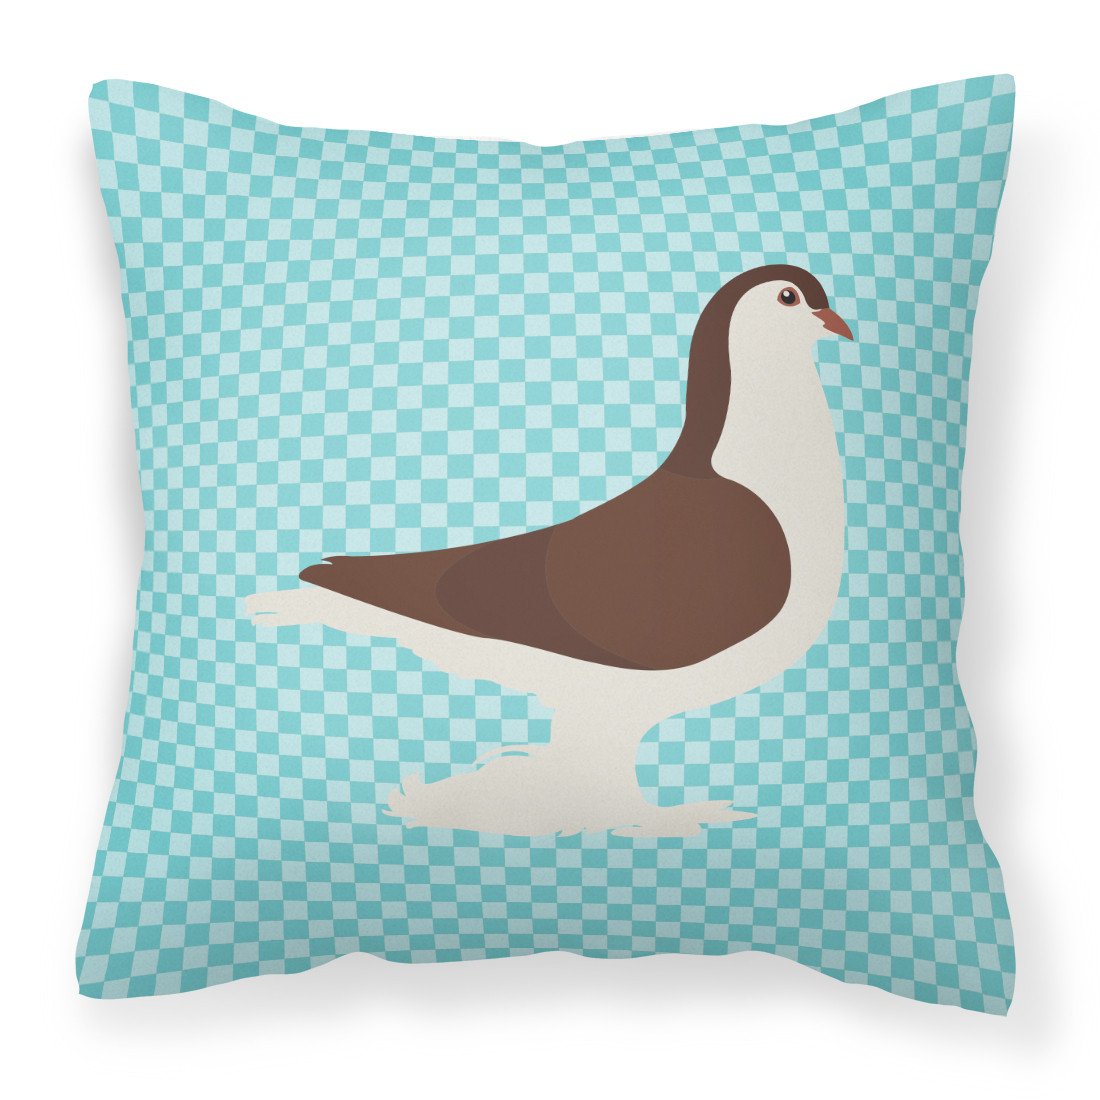 Large Pigeon Blue Check Fabric Decorative Pillow BB8117PW1818 by Caroline's Treasures